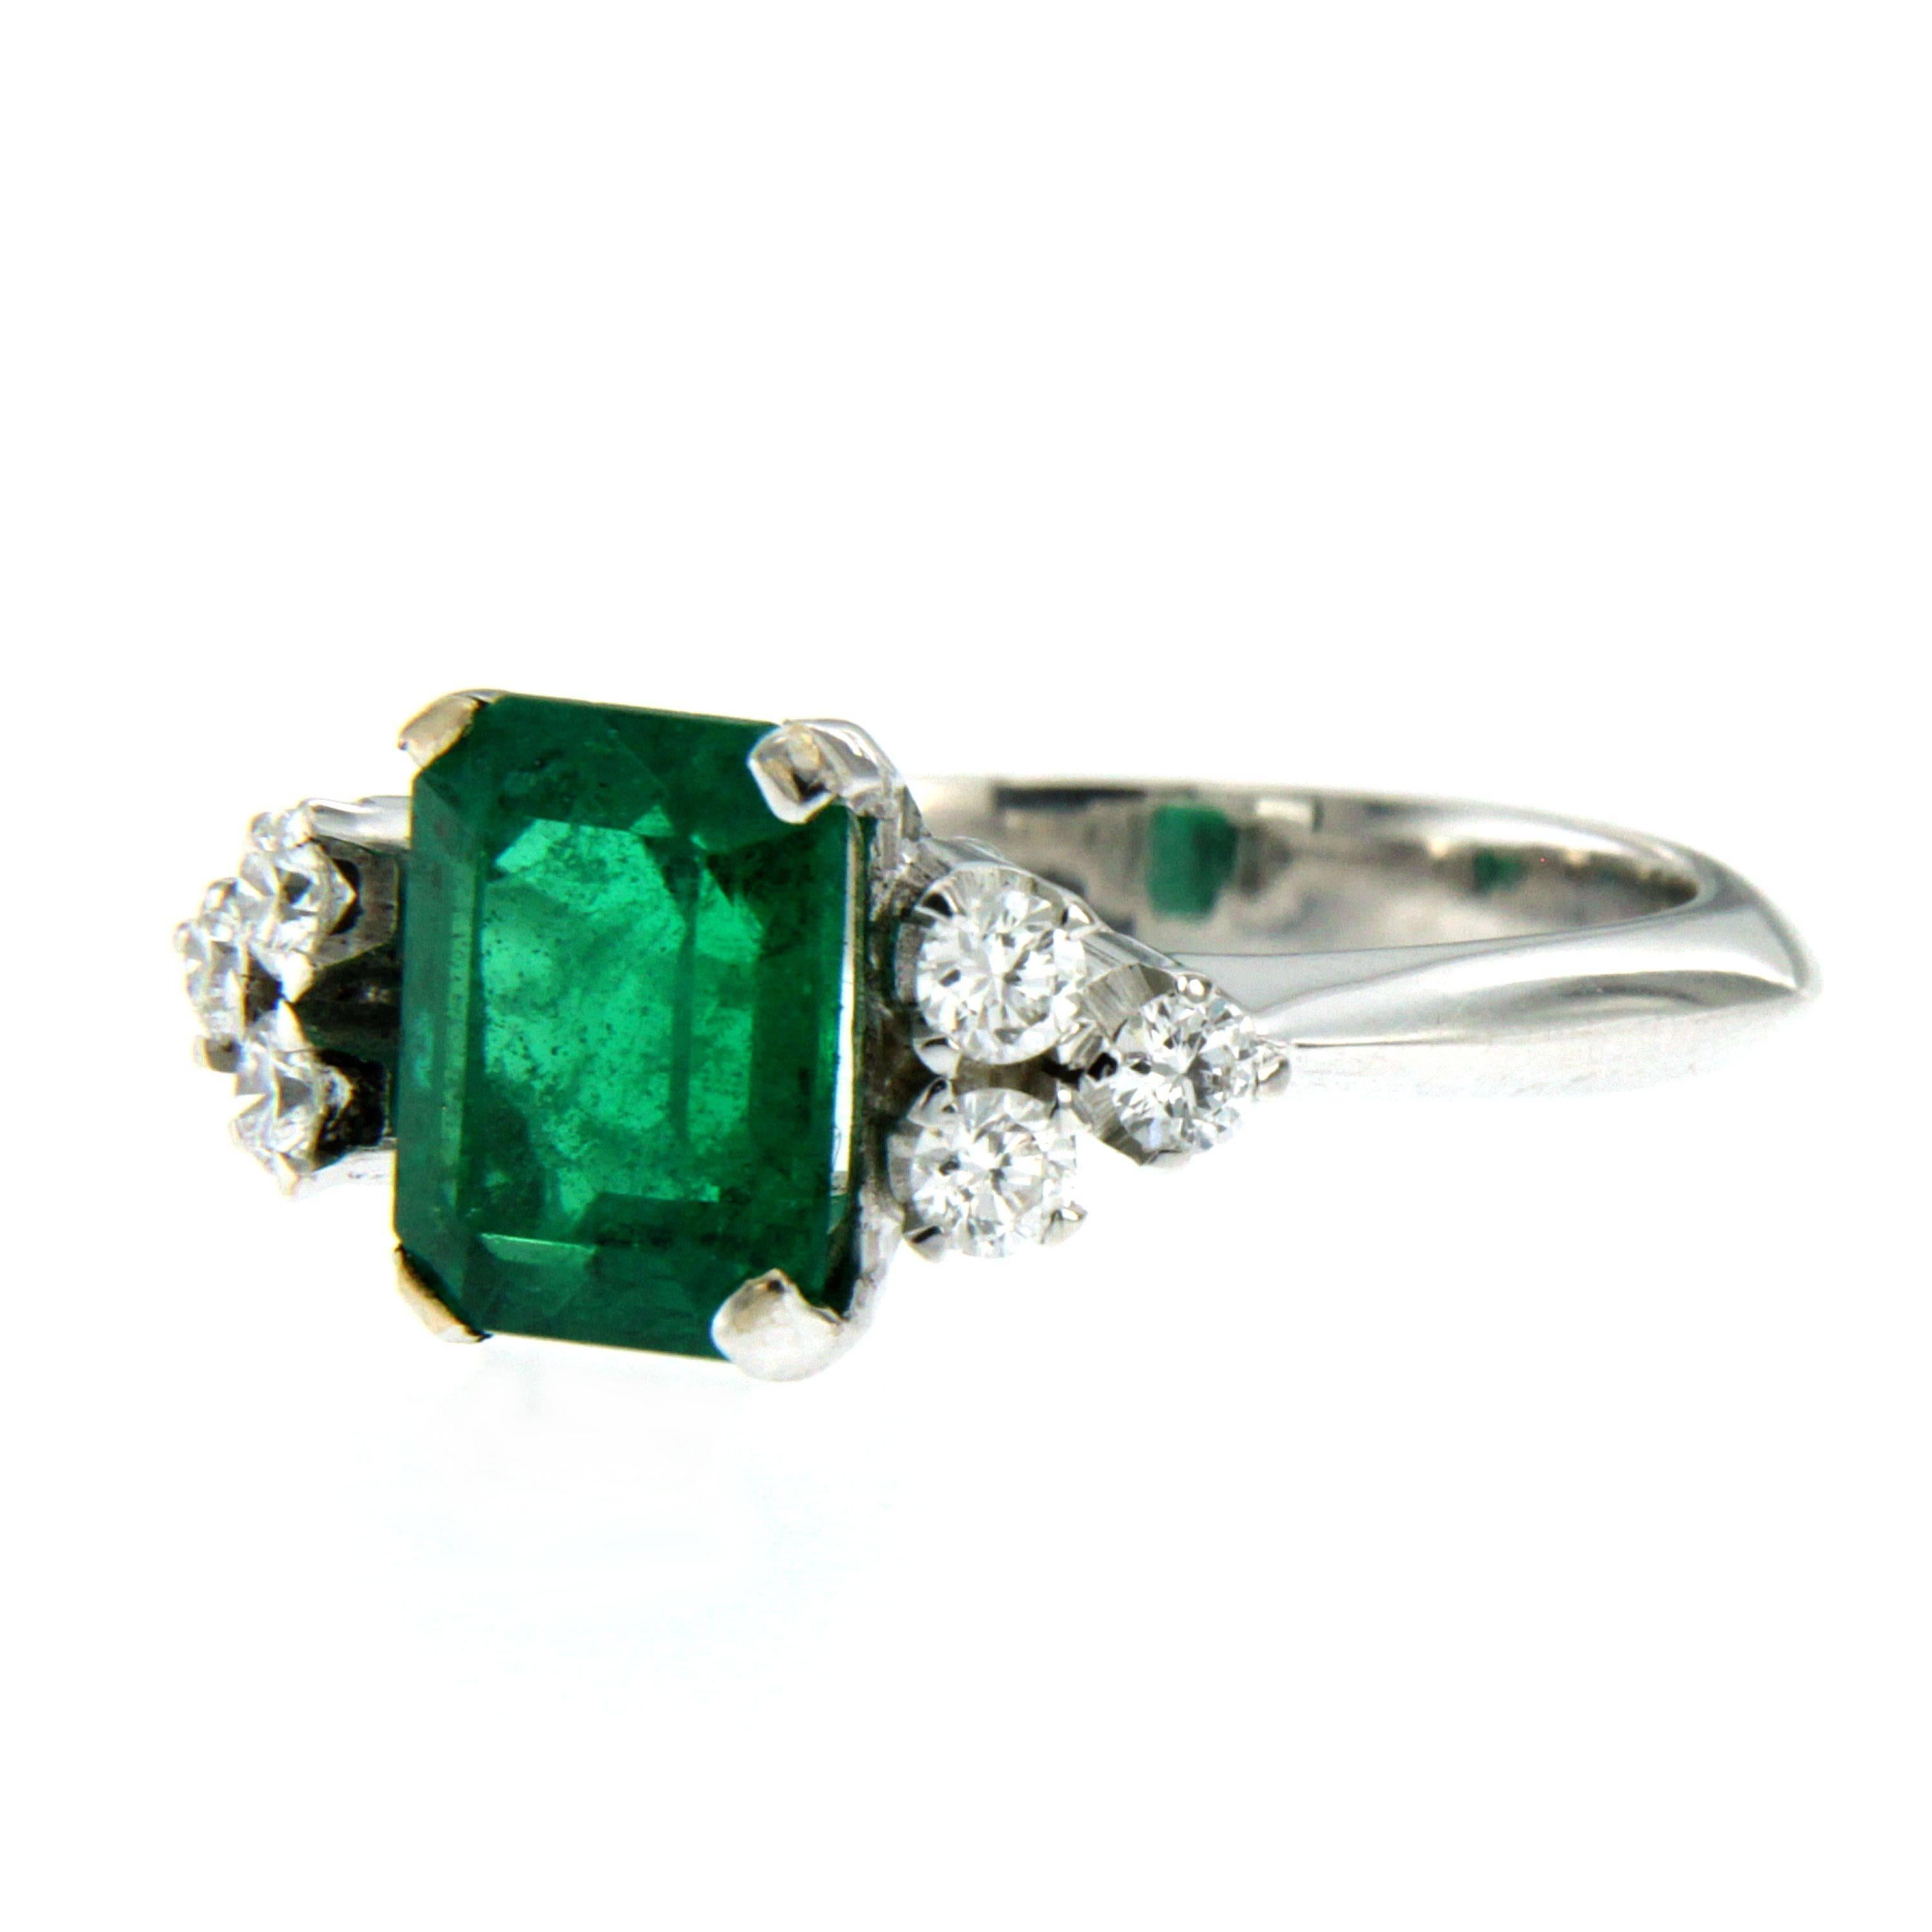 A beautiful 18k white gold mount showcasing a natural Colombian Emerald approx. 2.09 carats of great quality, surrounded by approx. 0.30 carat of round brilliant cut diamonds graded G color Vs.

CONDITION: Pre-owned - Excellent 
METAL:18k white